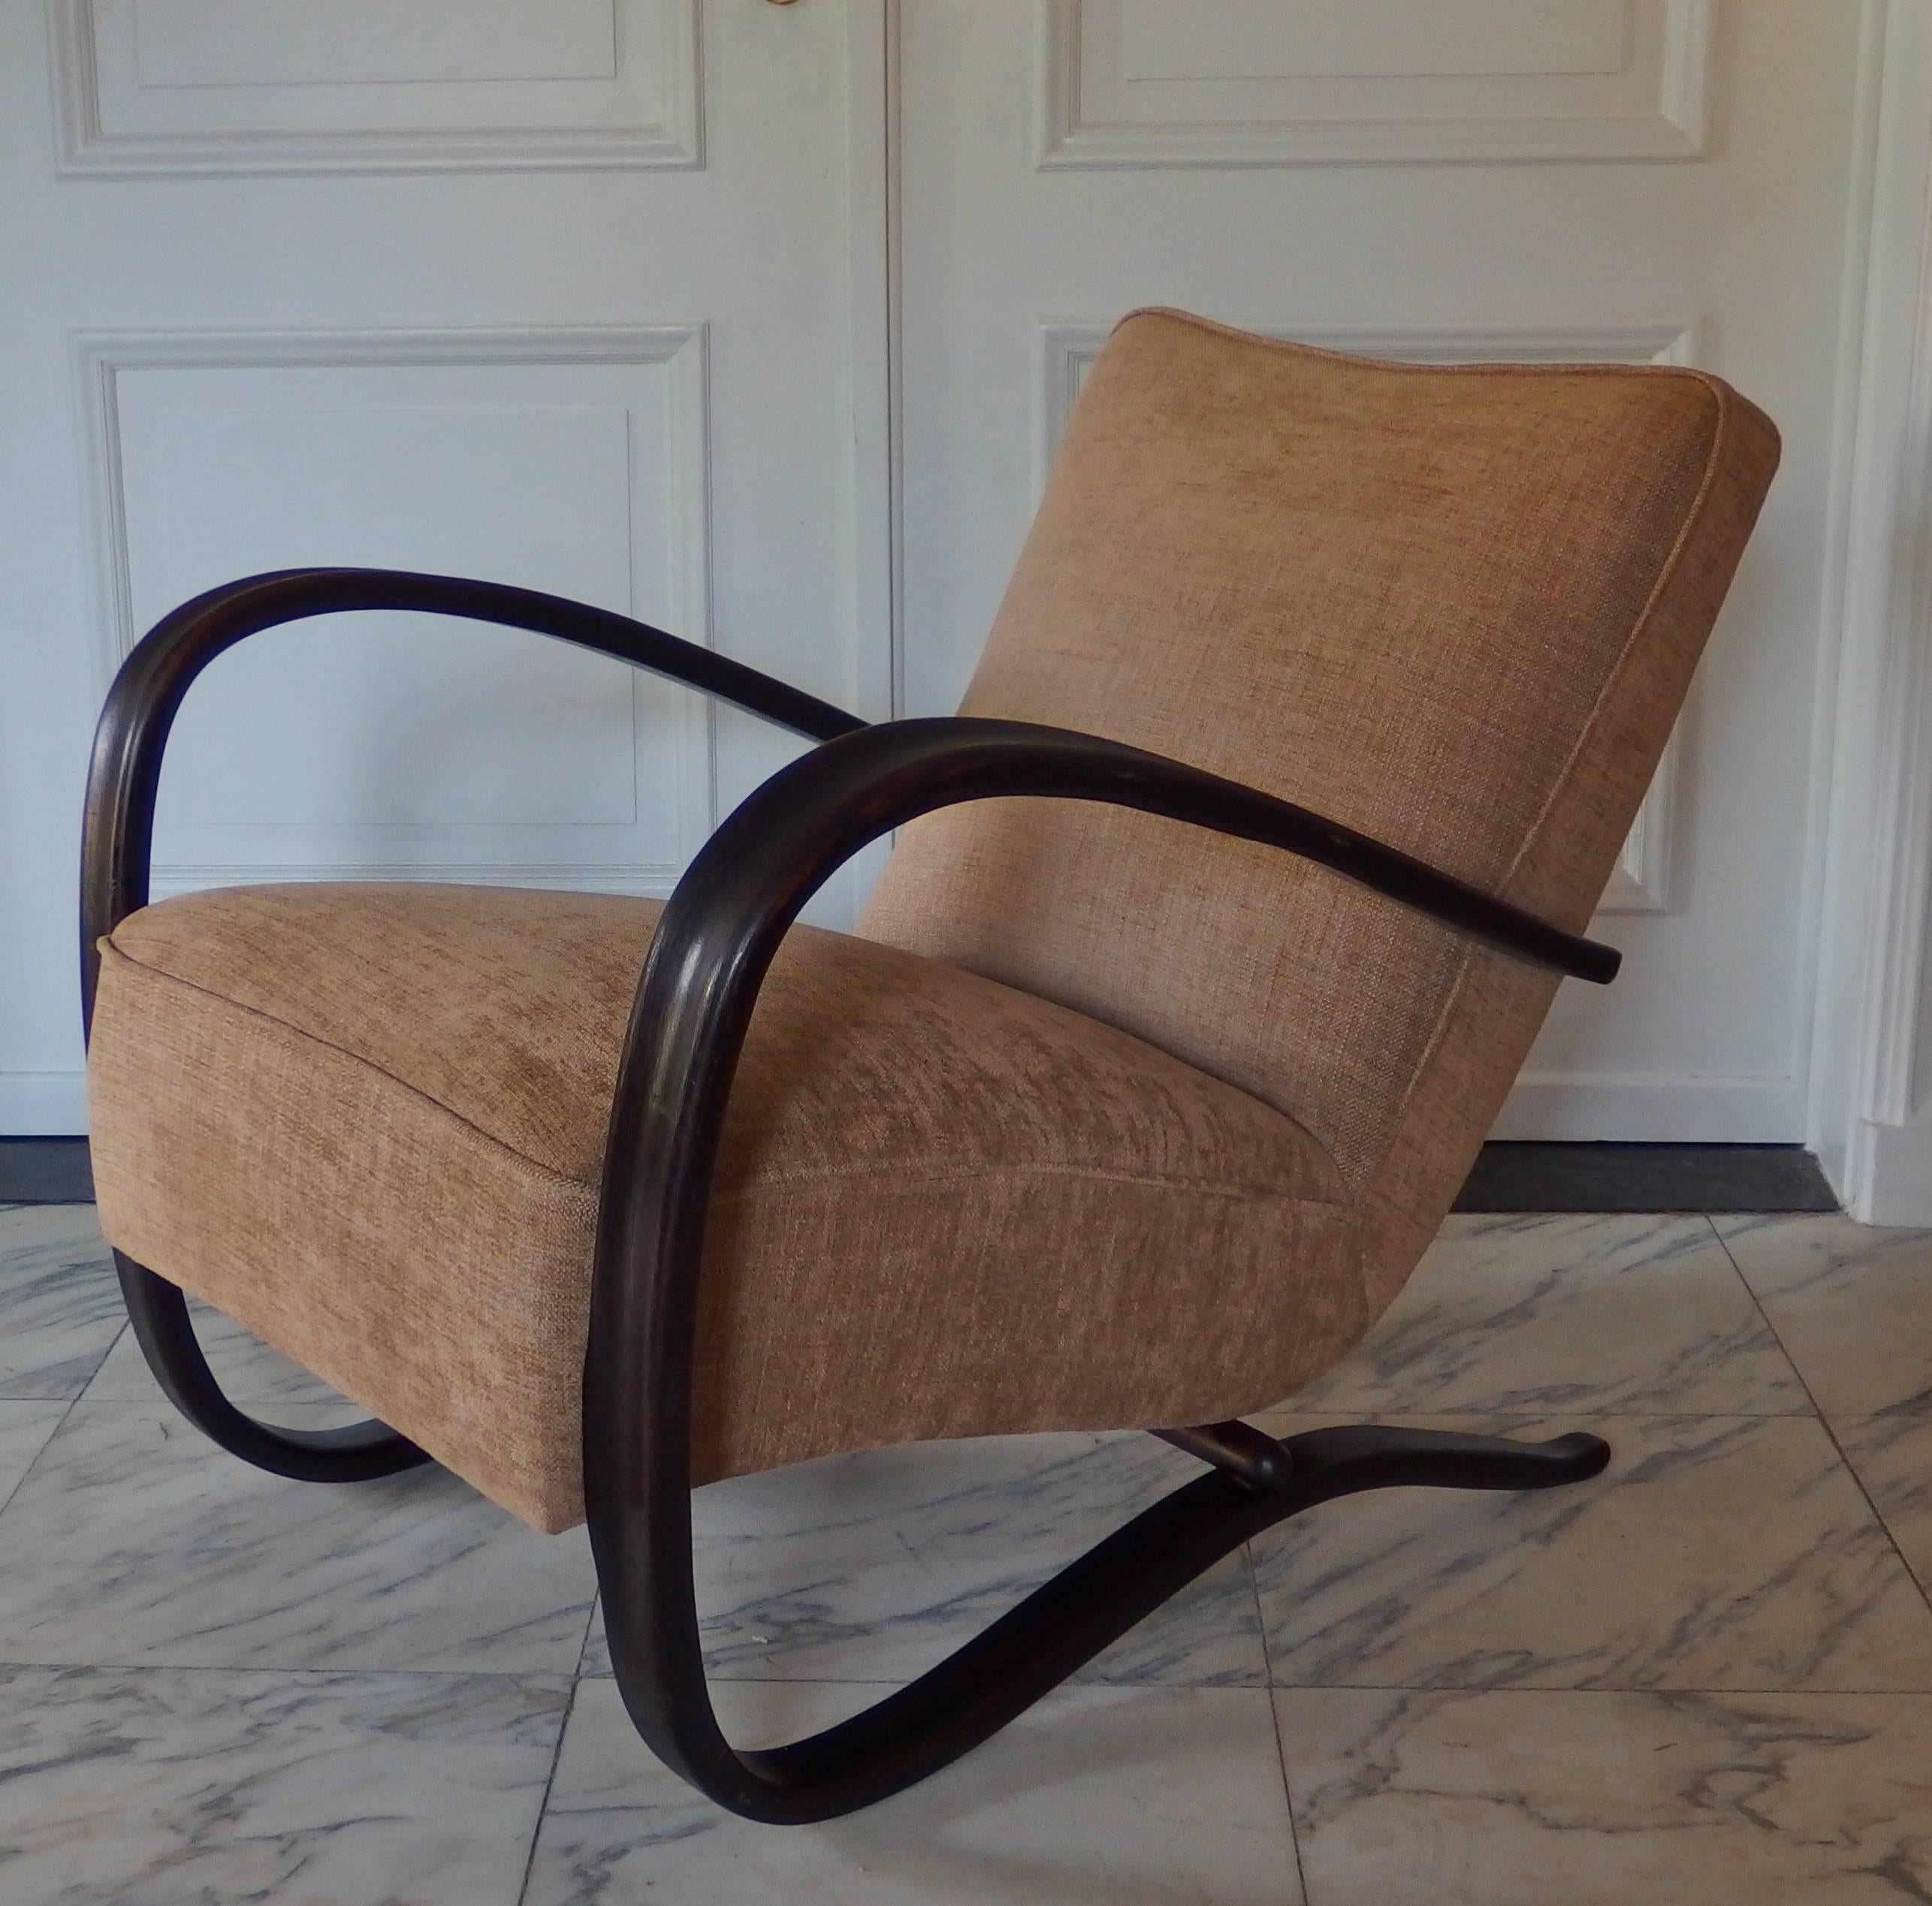 Pair of iconic Art Deco dark brown beechwood lounge chairs designed by Jindrich Halabala (Czech Republic, circa 1930) and made by Thonet. These chairs are newly restored and reupholstered with a biscuit colored chenille.